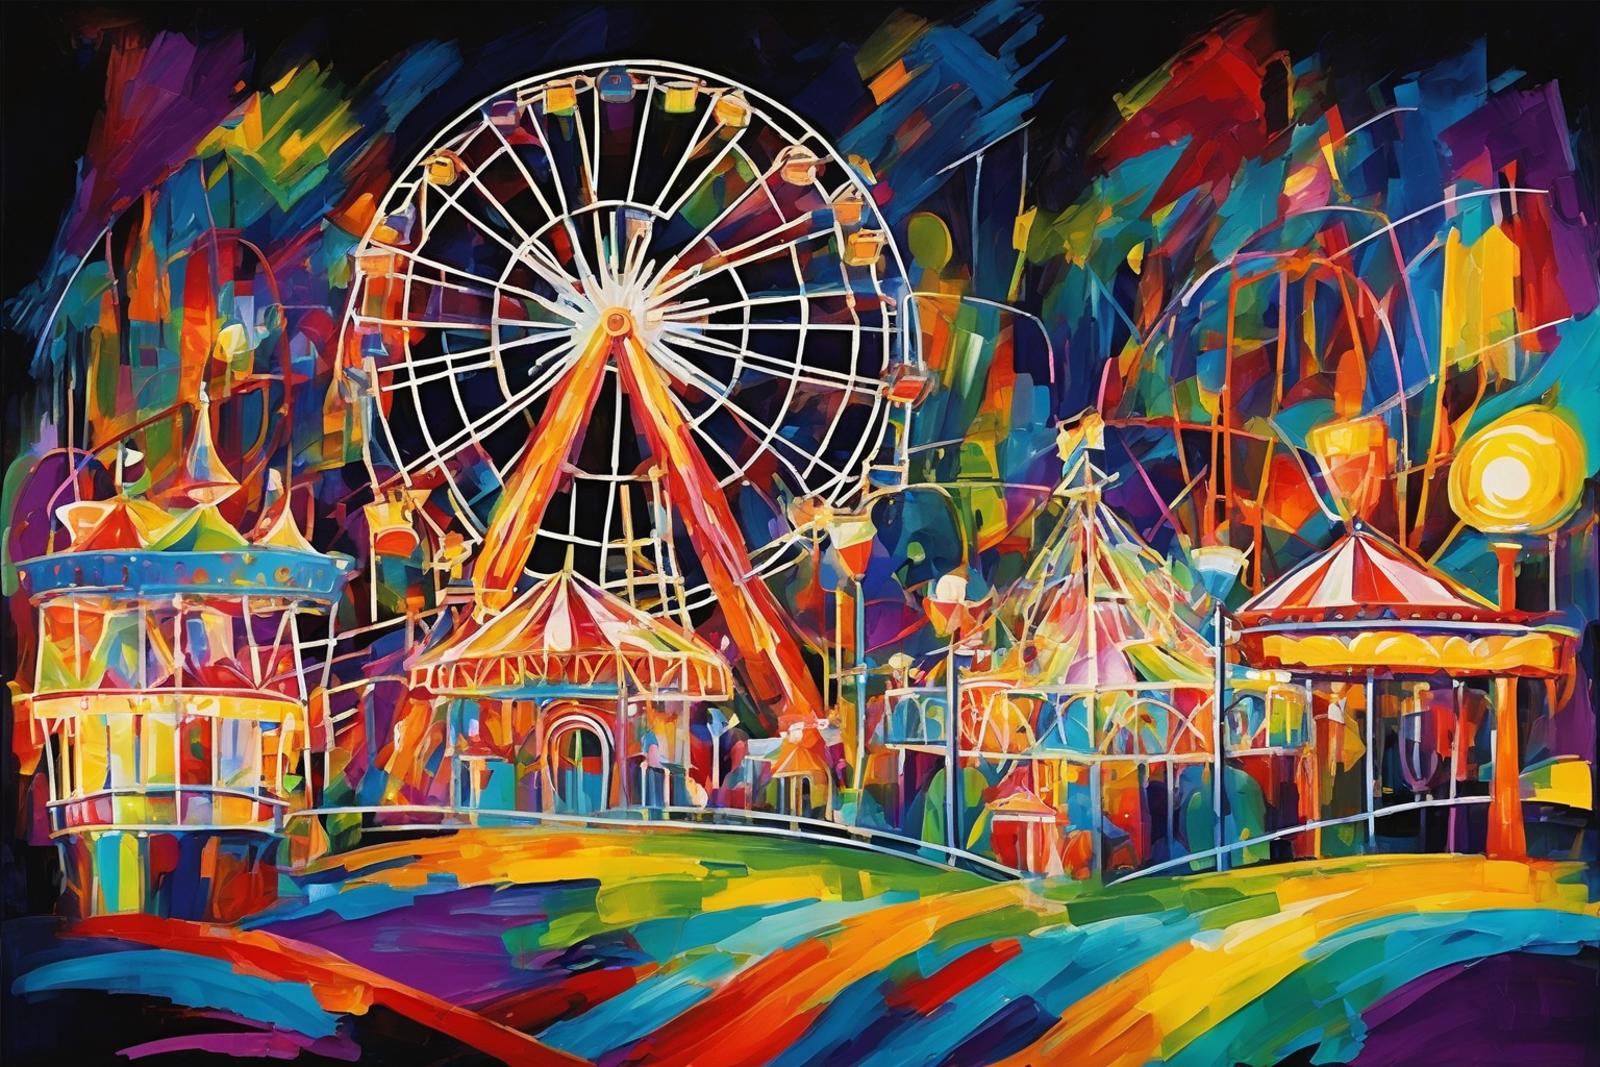 A painting of a Ferris wheel at night with a carousel in the background.